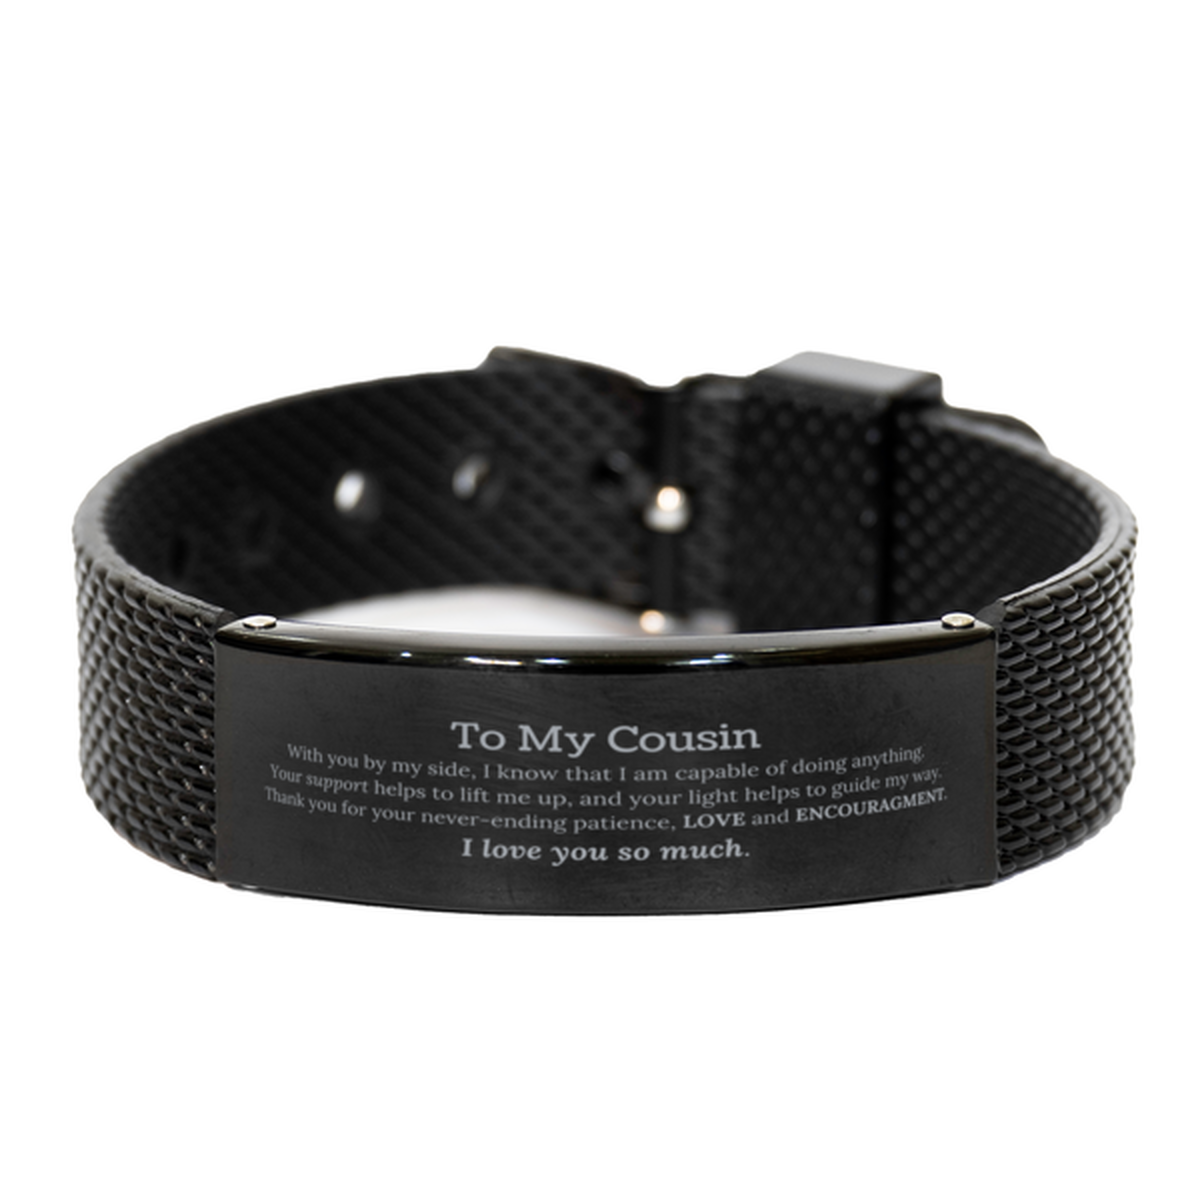 Appreciation Cousin Black Shark Mesh Bracelet Gifts, To My Cousin Birthday Christmas Wedding Keepsake Gifts for Cousin With you by my side, I know that I am capable of doing anything. I love you so much